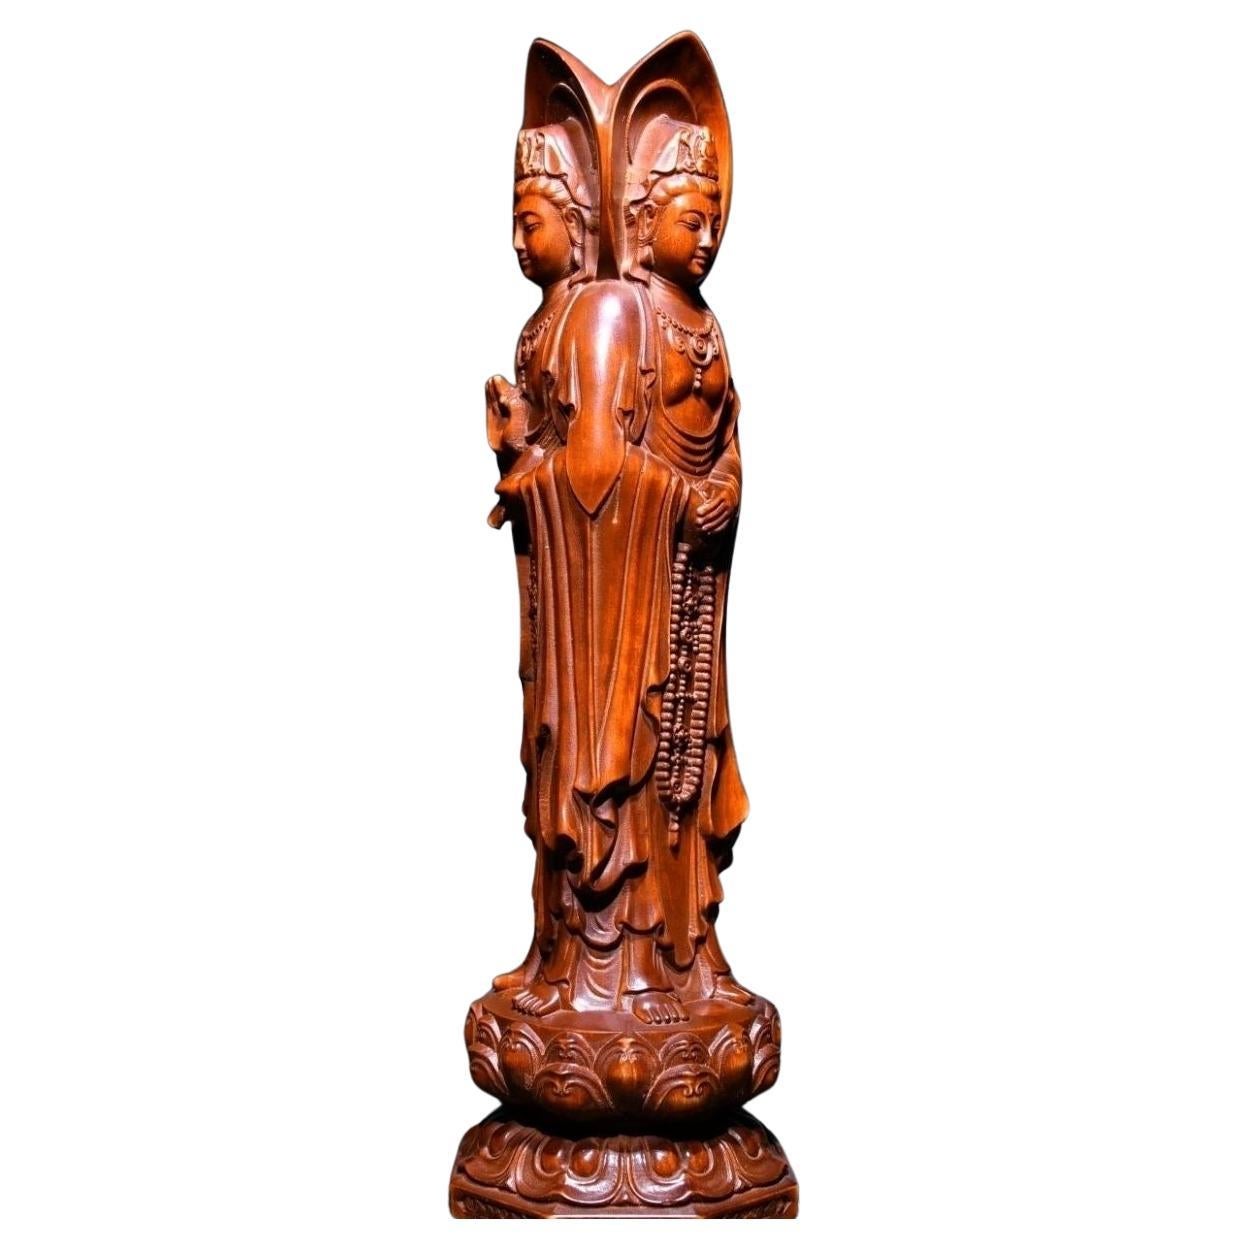 Chinese Vintage Wood Carving Three Sided Guan Yin Buddhas Statue For Sale